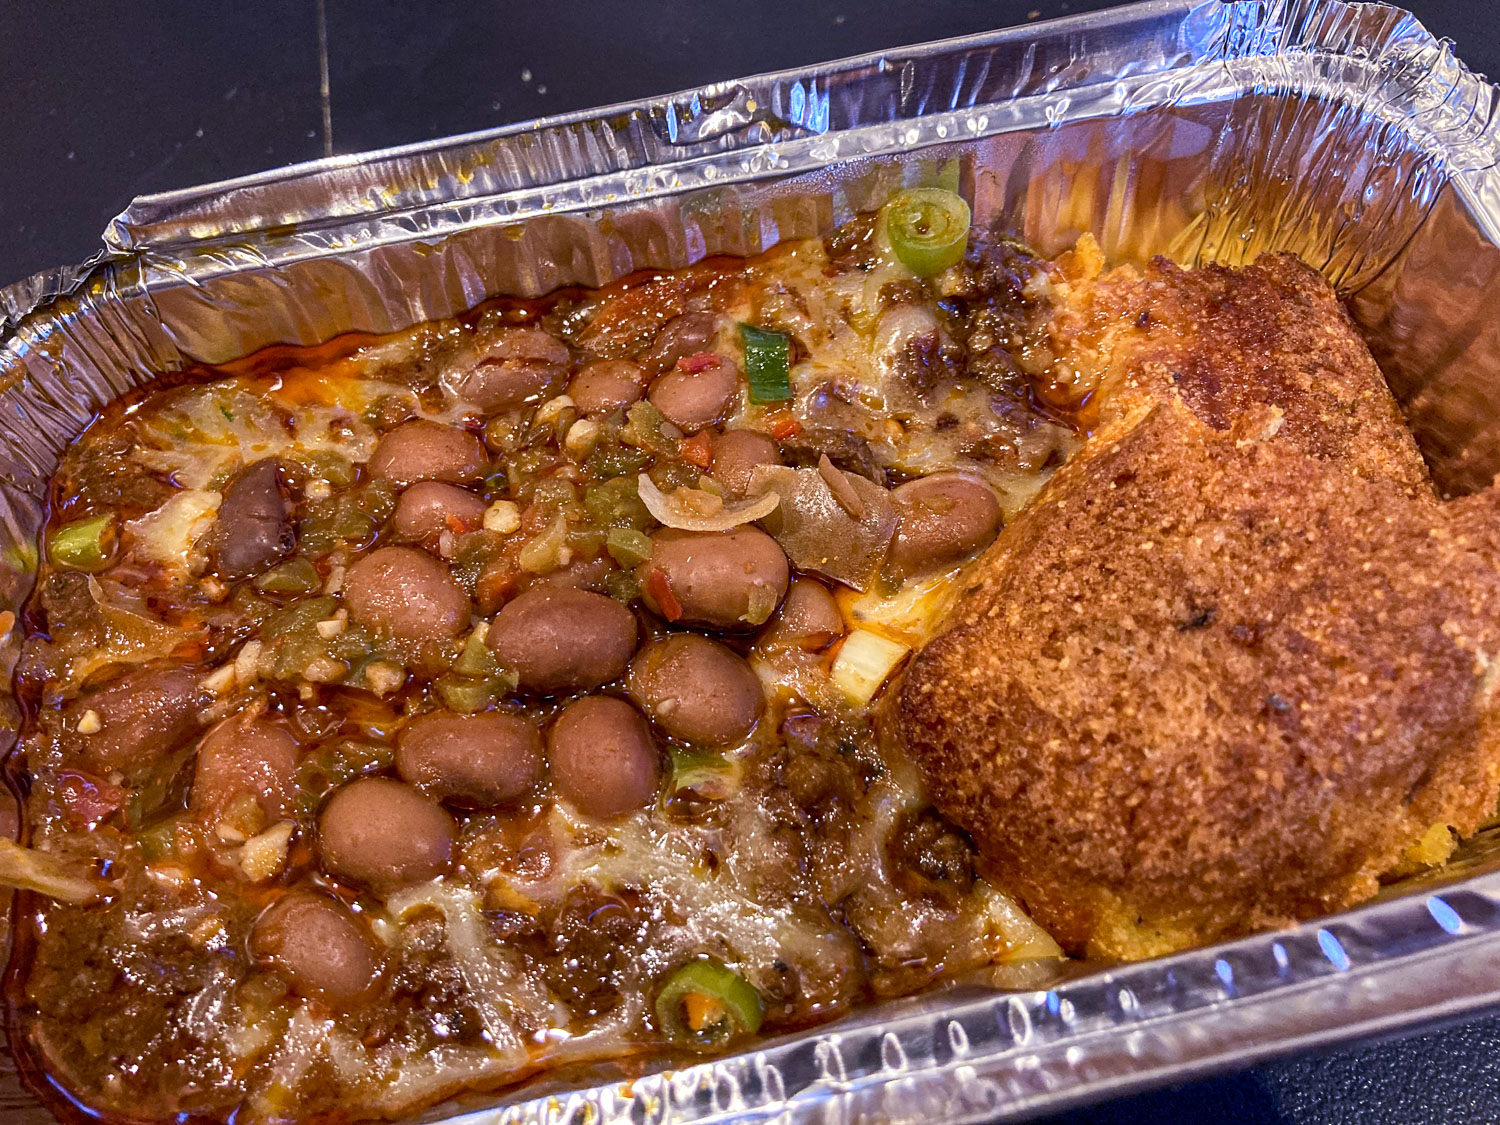 A foil container of beef chili with beans and cornbread